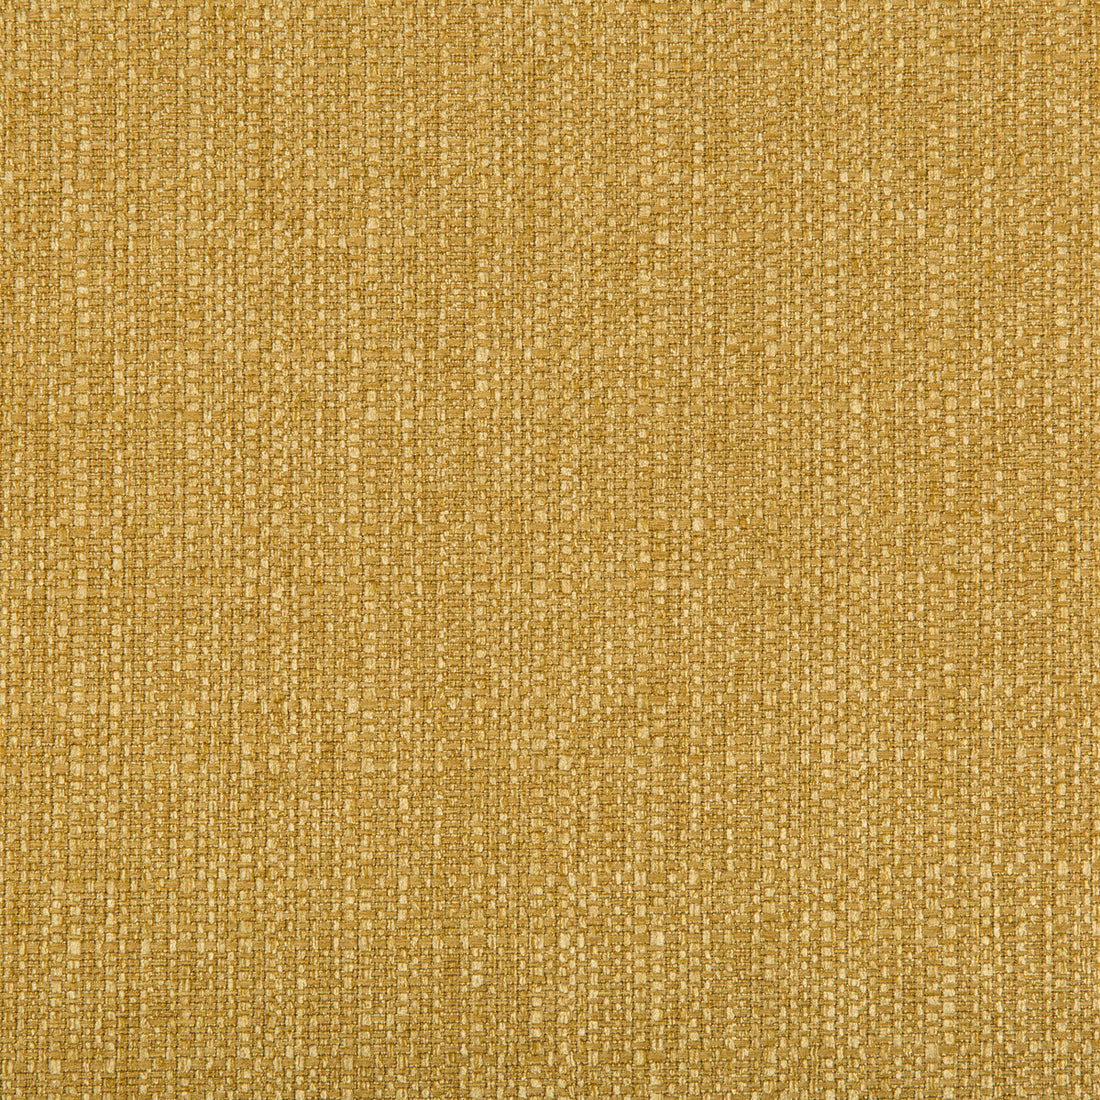 Kravet Contract fabric in 35472-40 color - pattern 35472.40.0 - by Kravet Contract